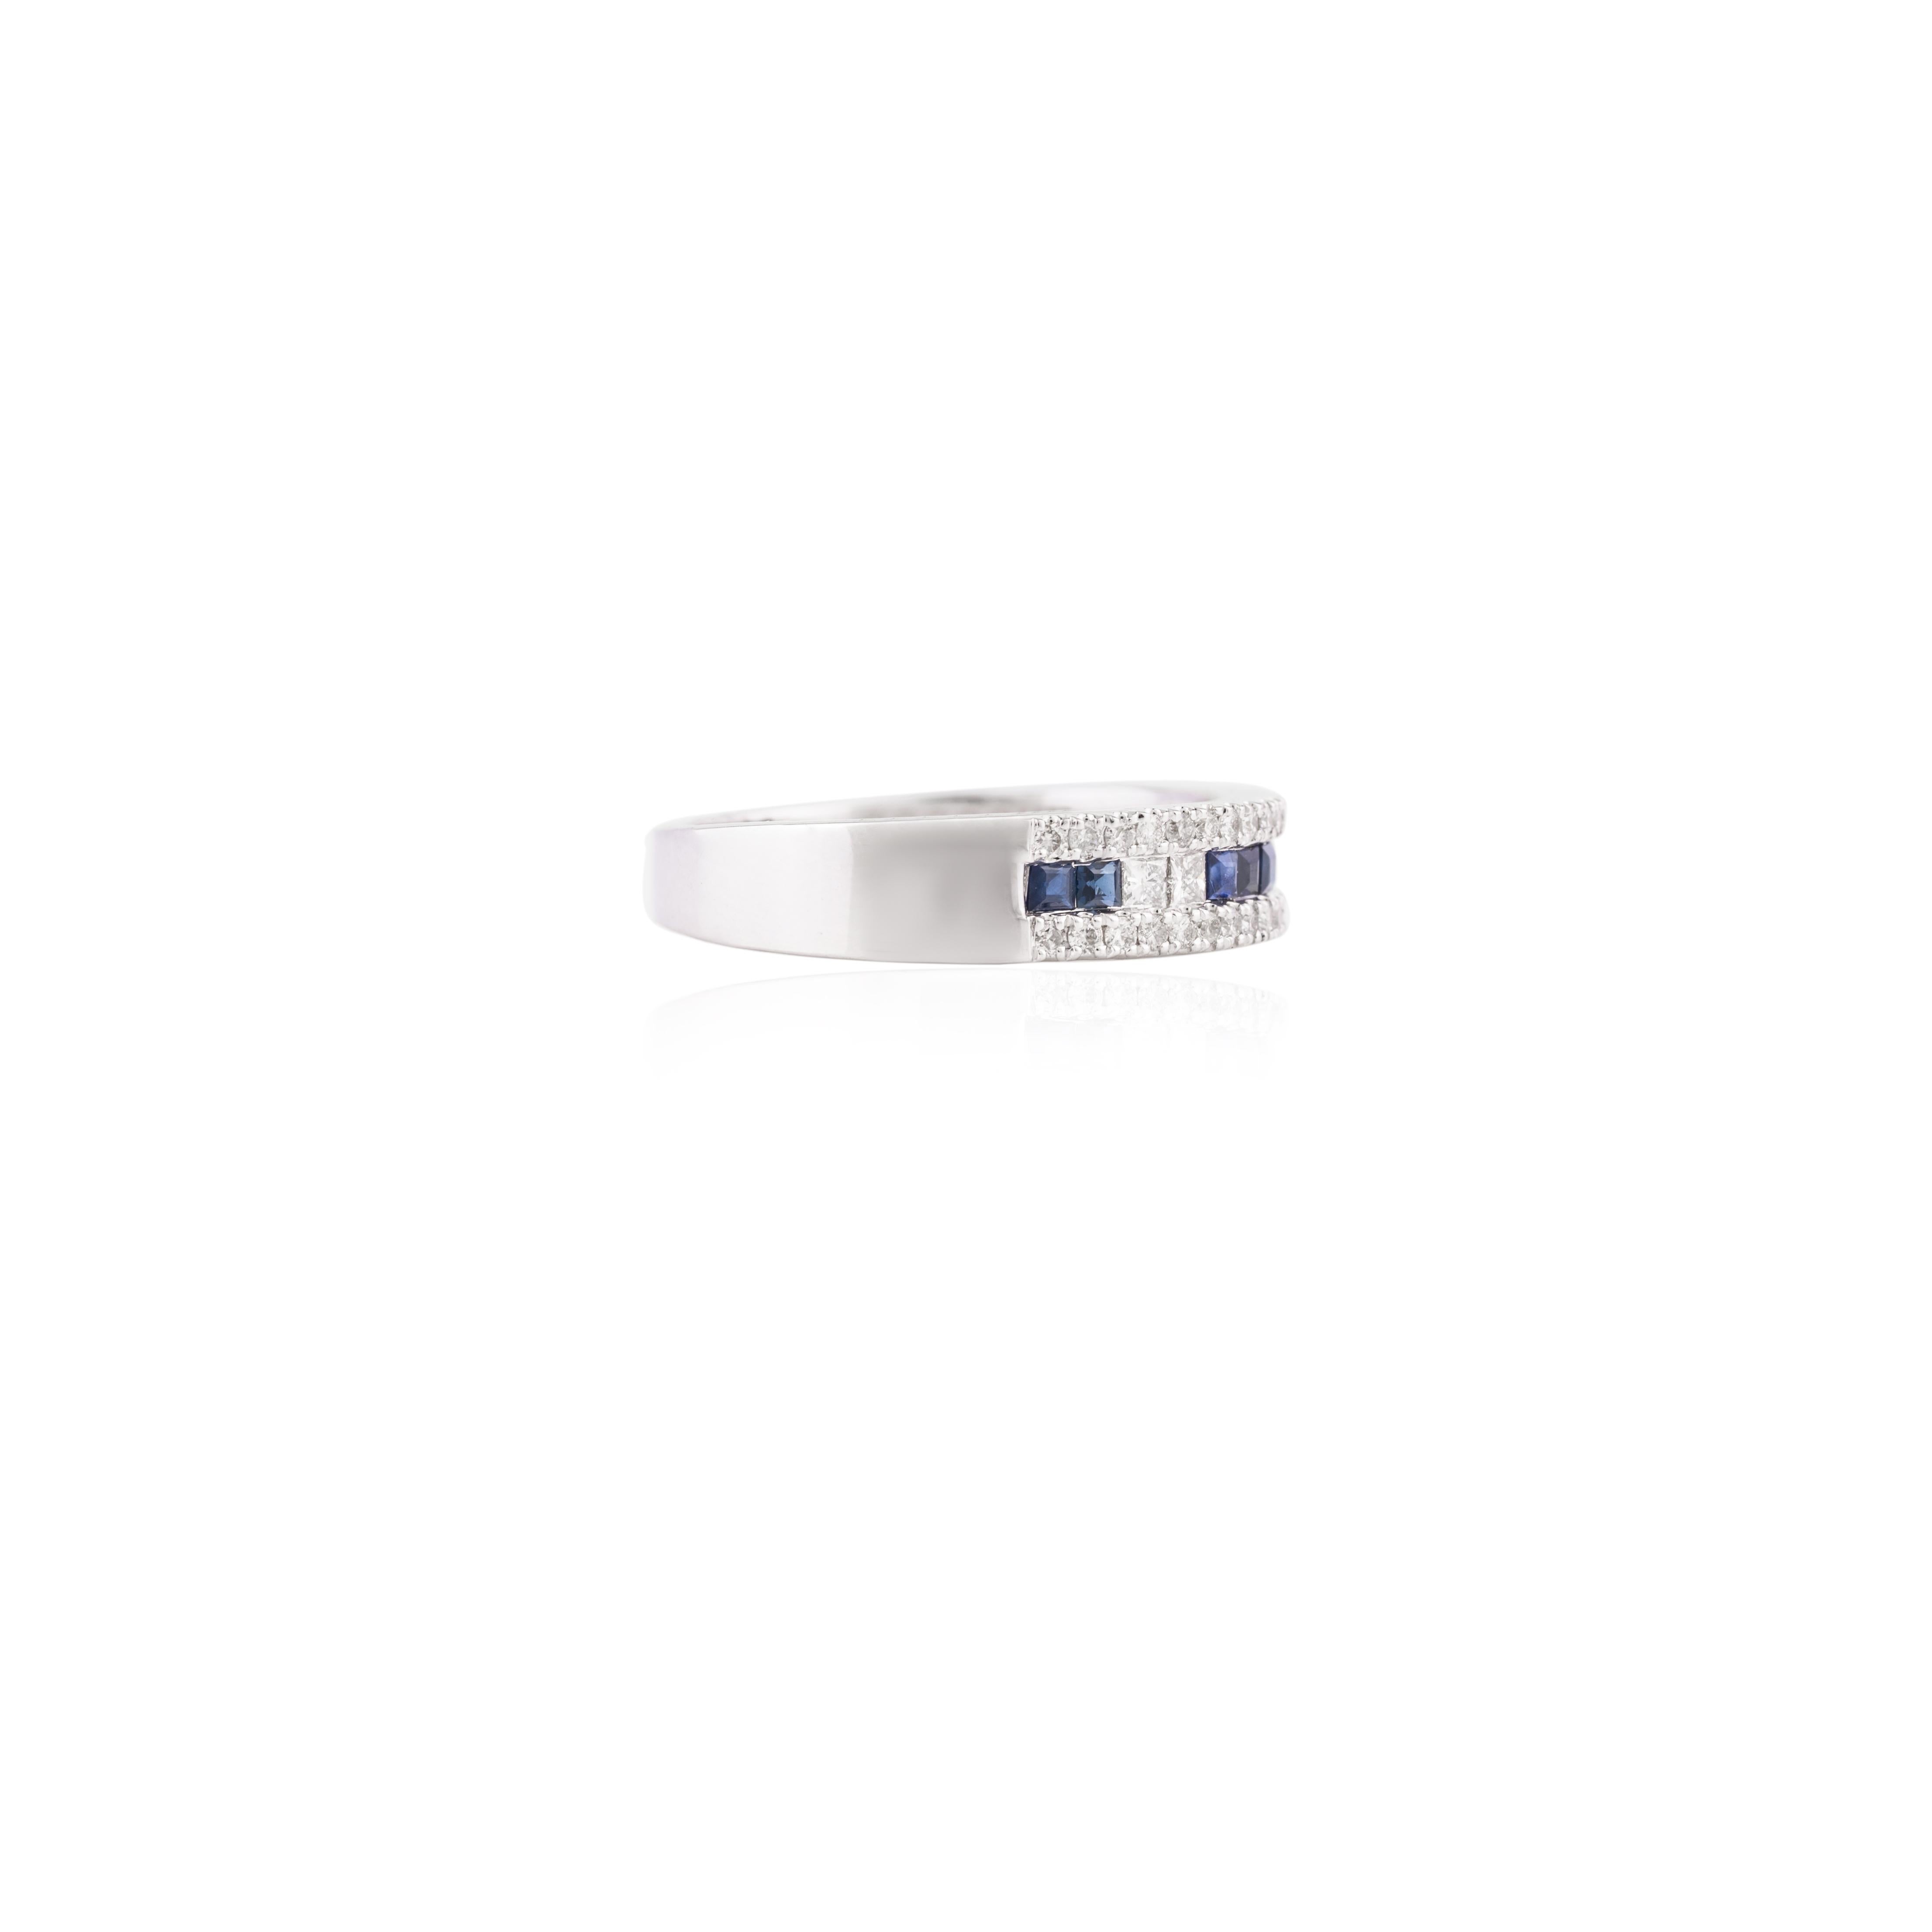 For Sale:  Stunning Blue Sapphire Diamond Engagement Band Ring for Her in 18k White Gold 5